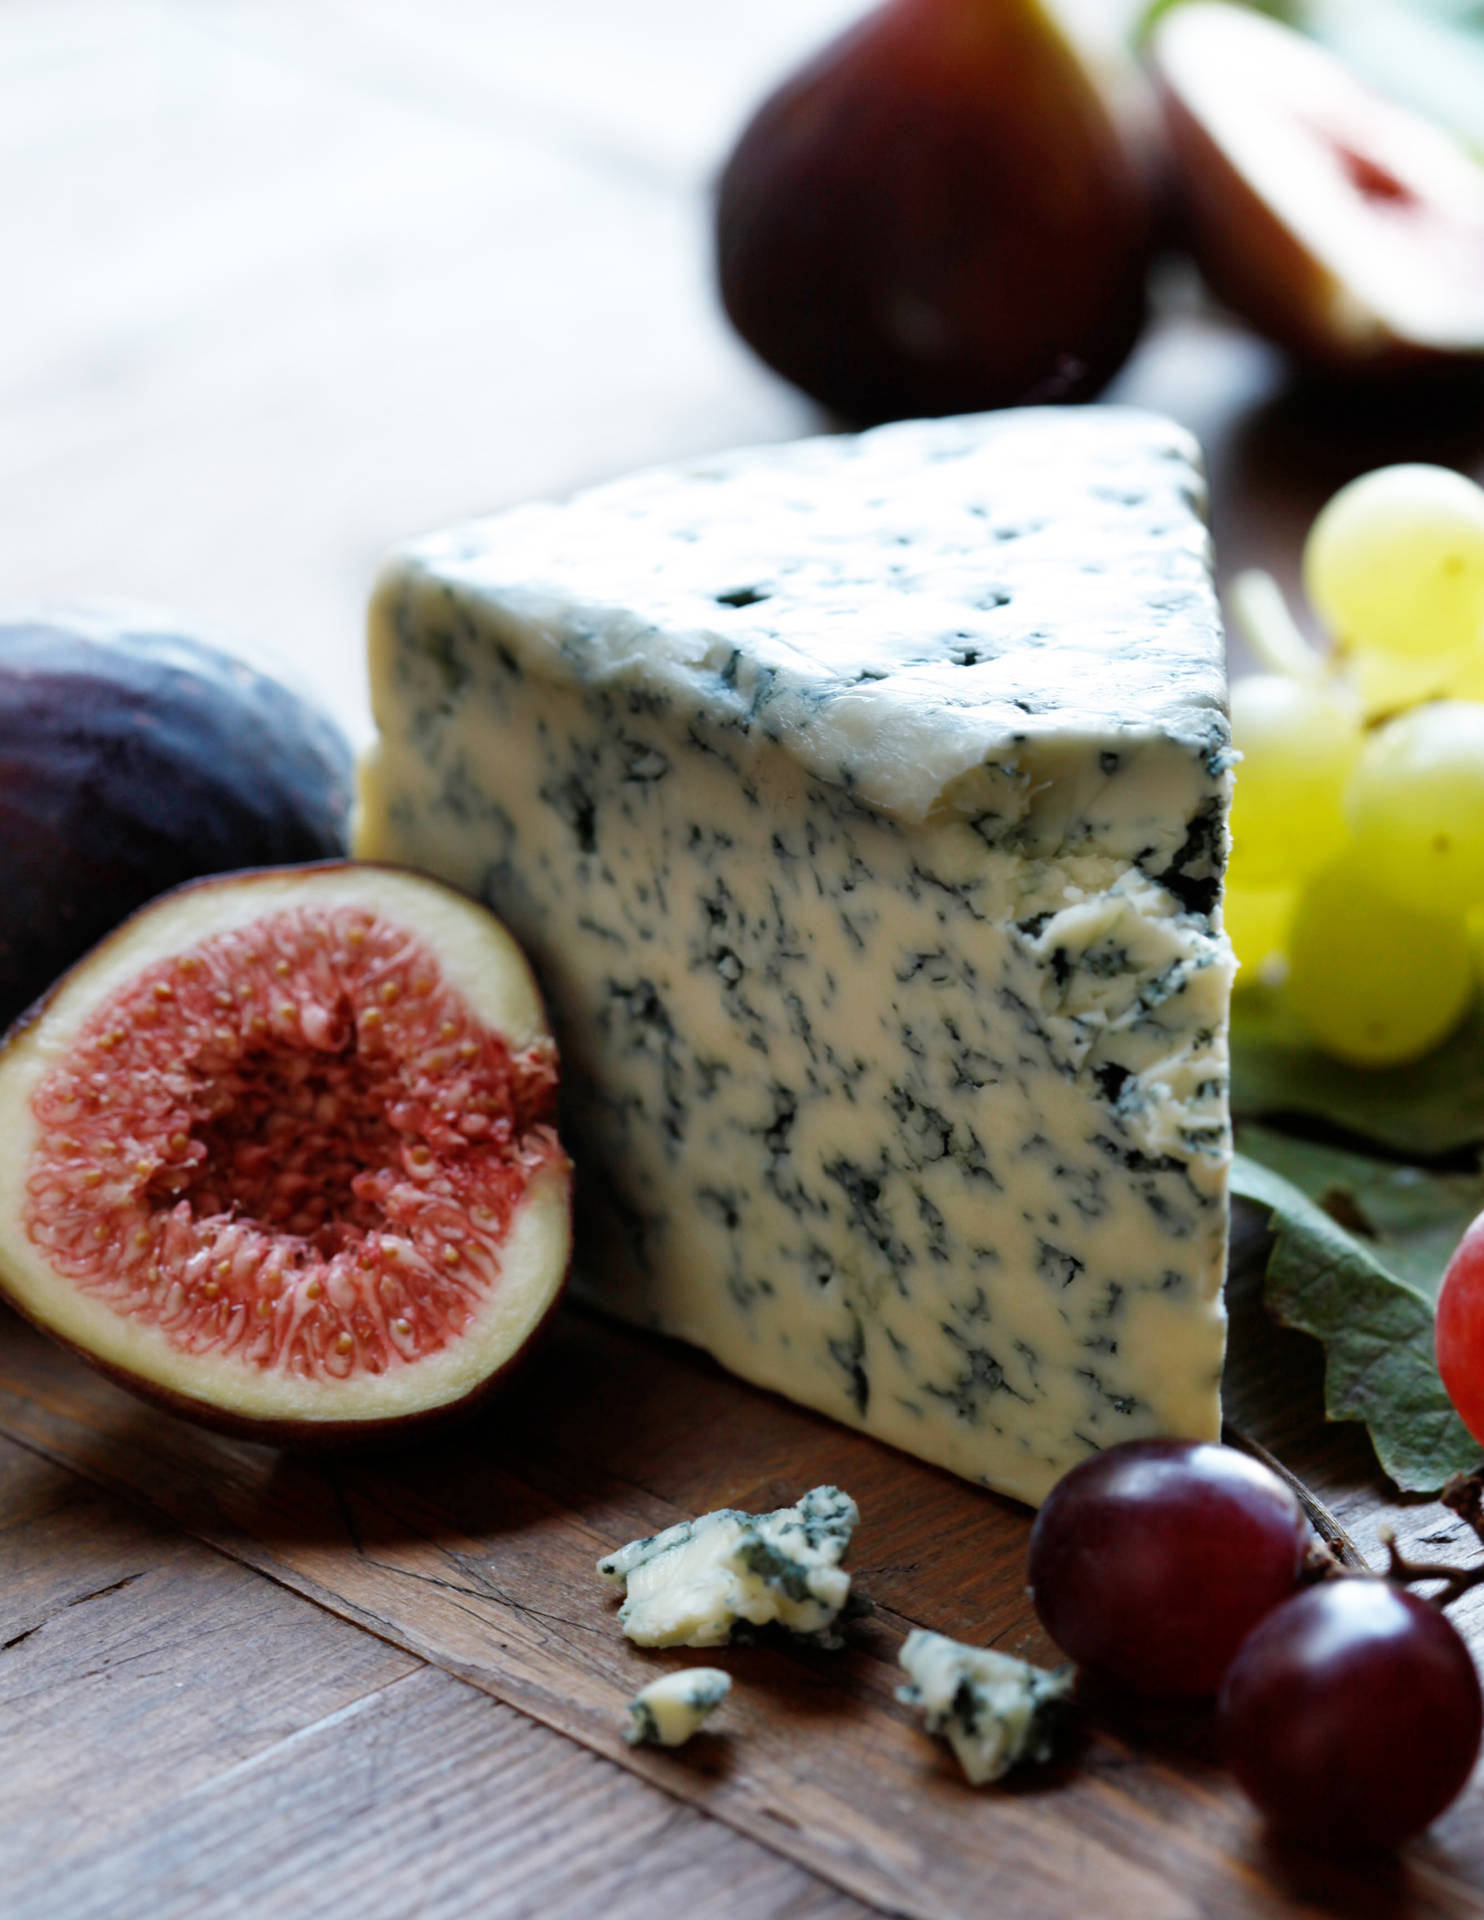 Blue Cheese And Fruits Wallpaper